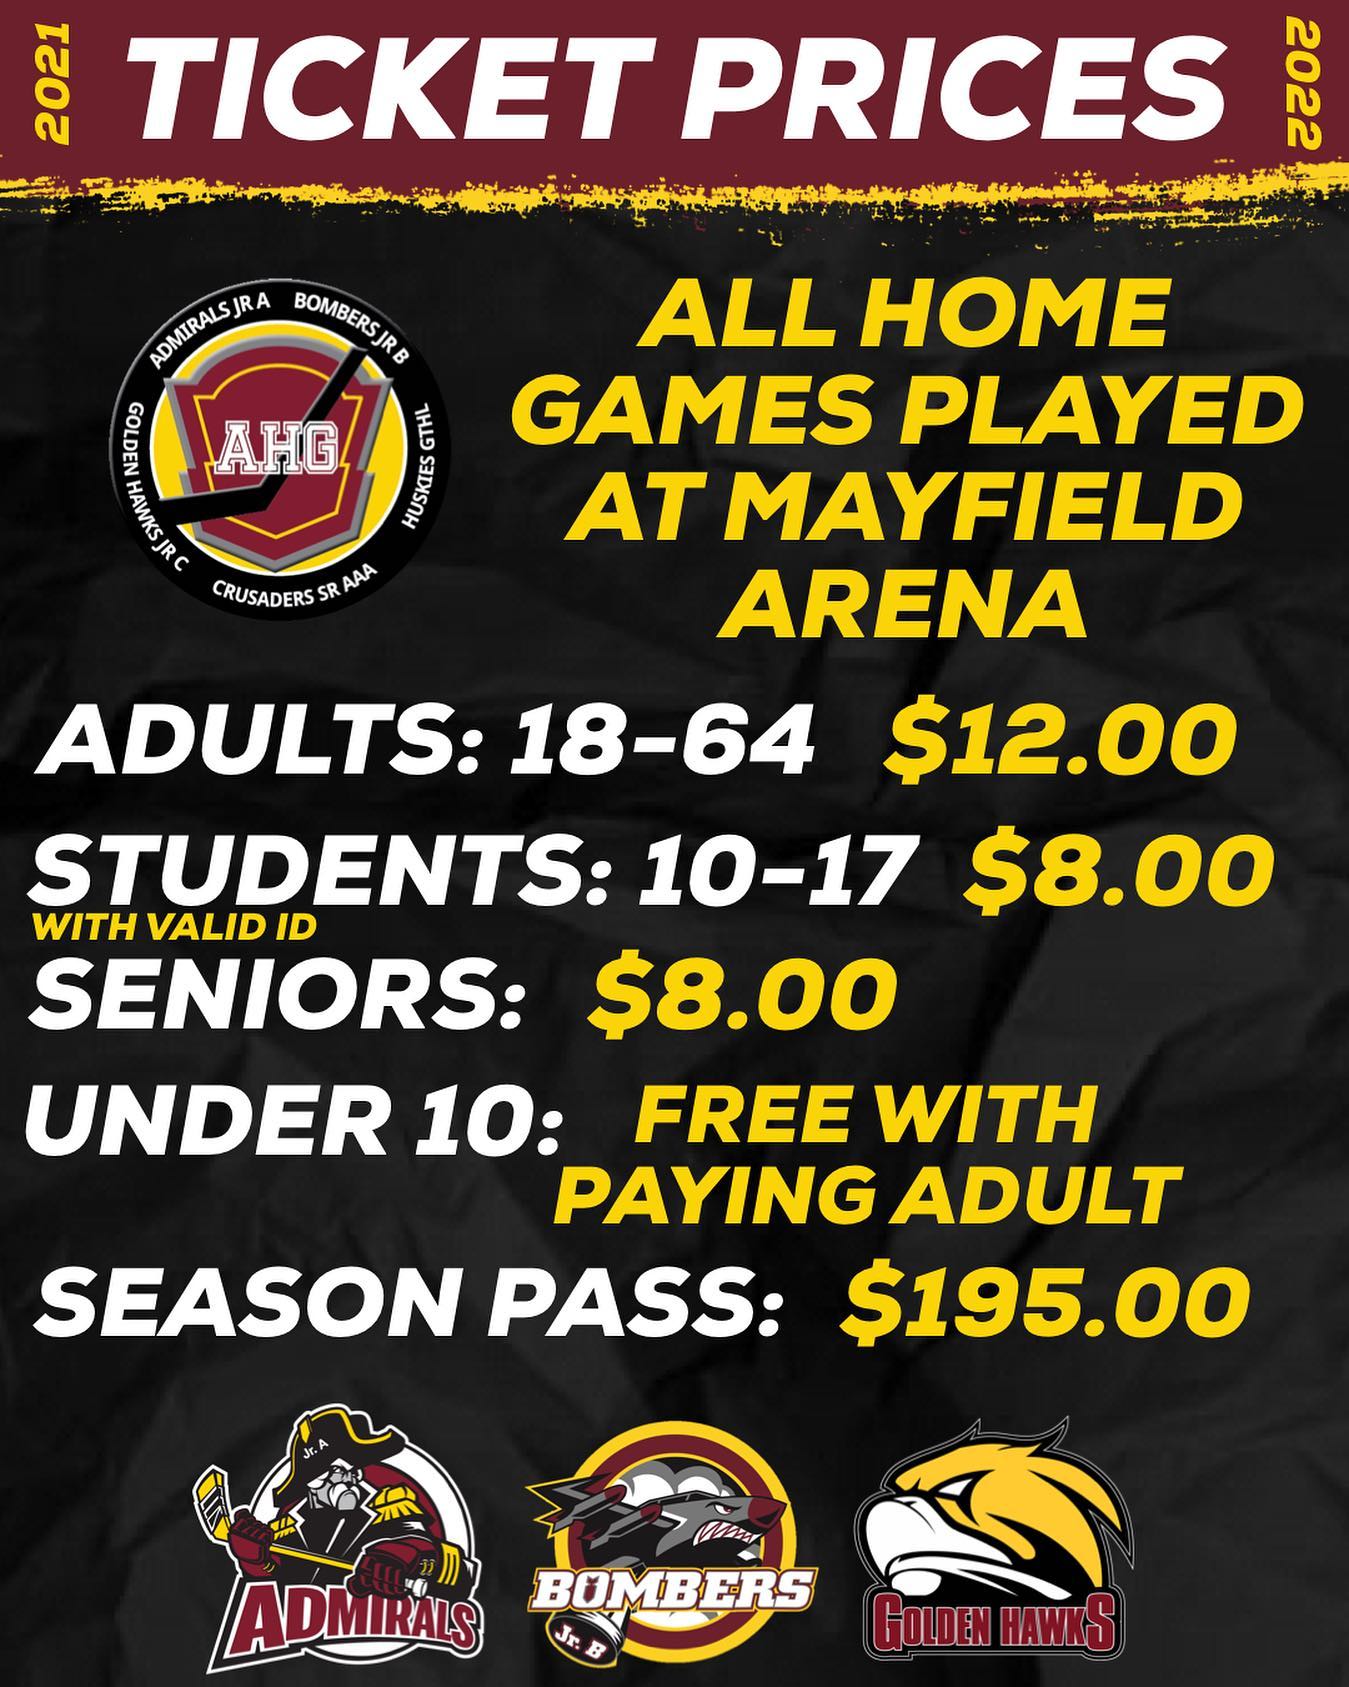 Ticket prices for the Arsenault Hockey Group’s 2021-22 seasons!

Upon arrival to Mayfield Arena, fans will have to complete a Covid-19 screening and adhere to protocols set out by the facility.

We can’t wait to see you there!